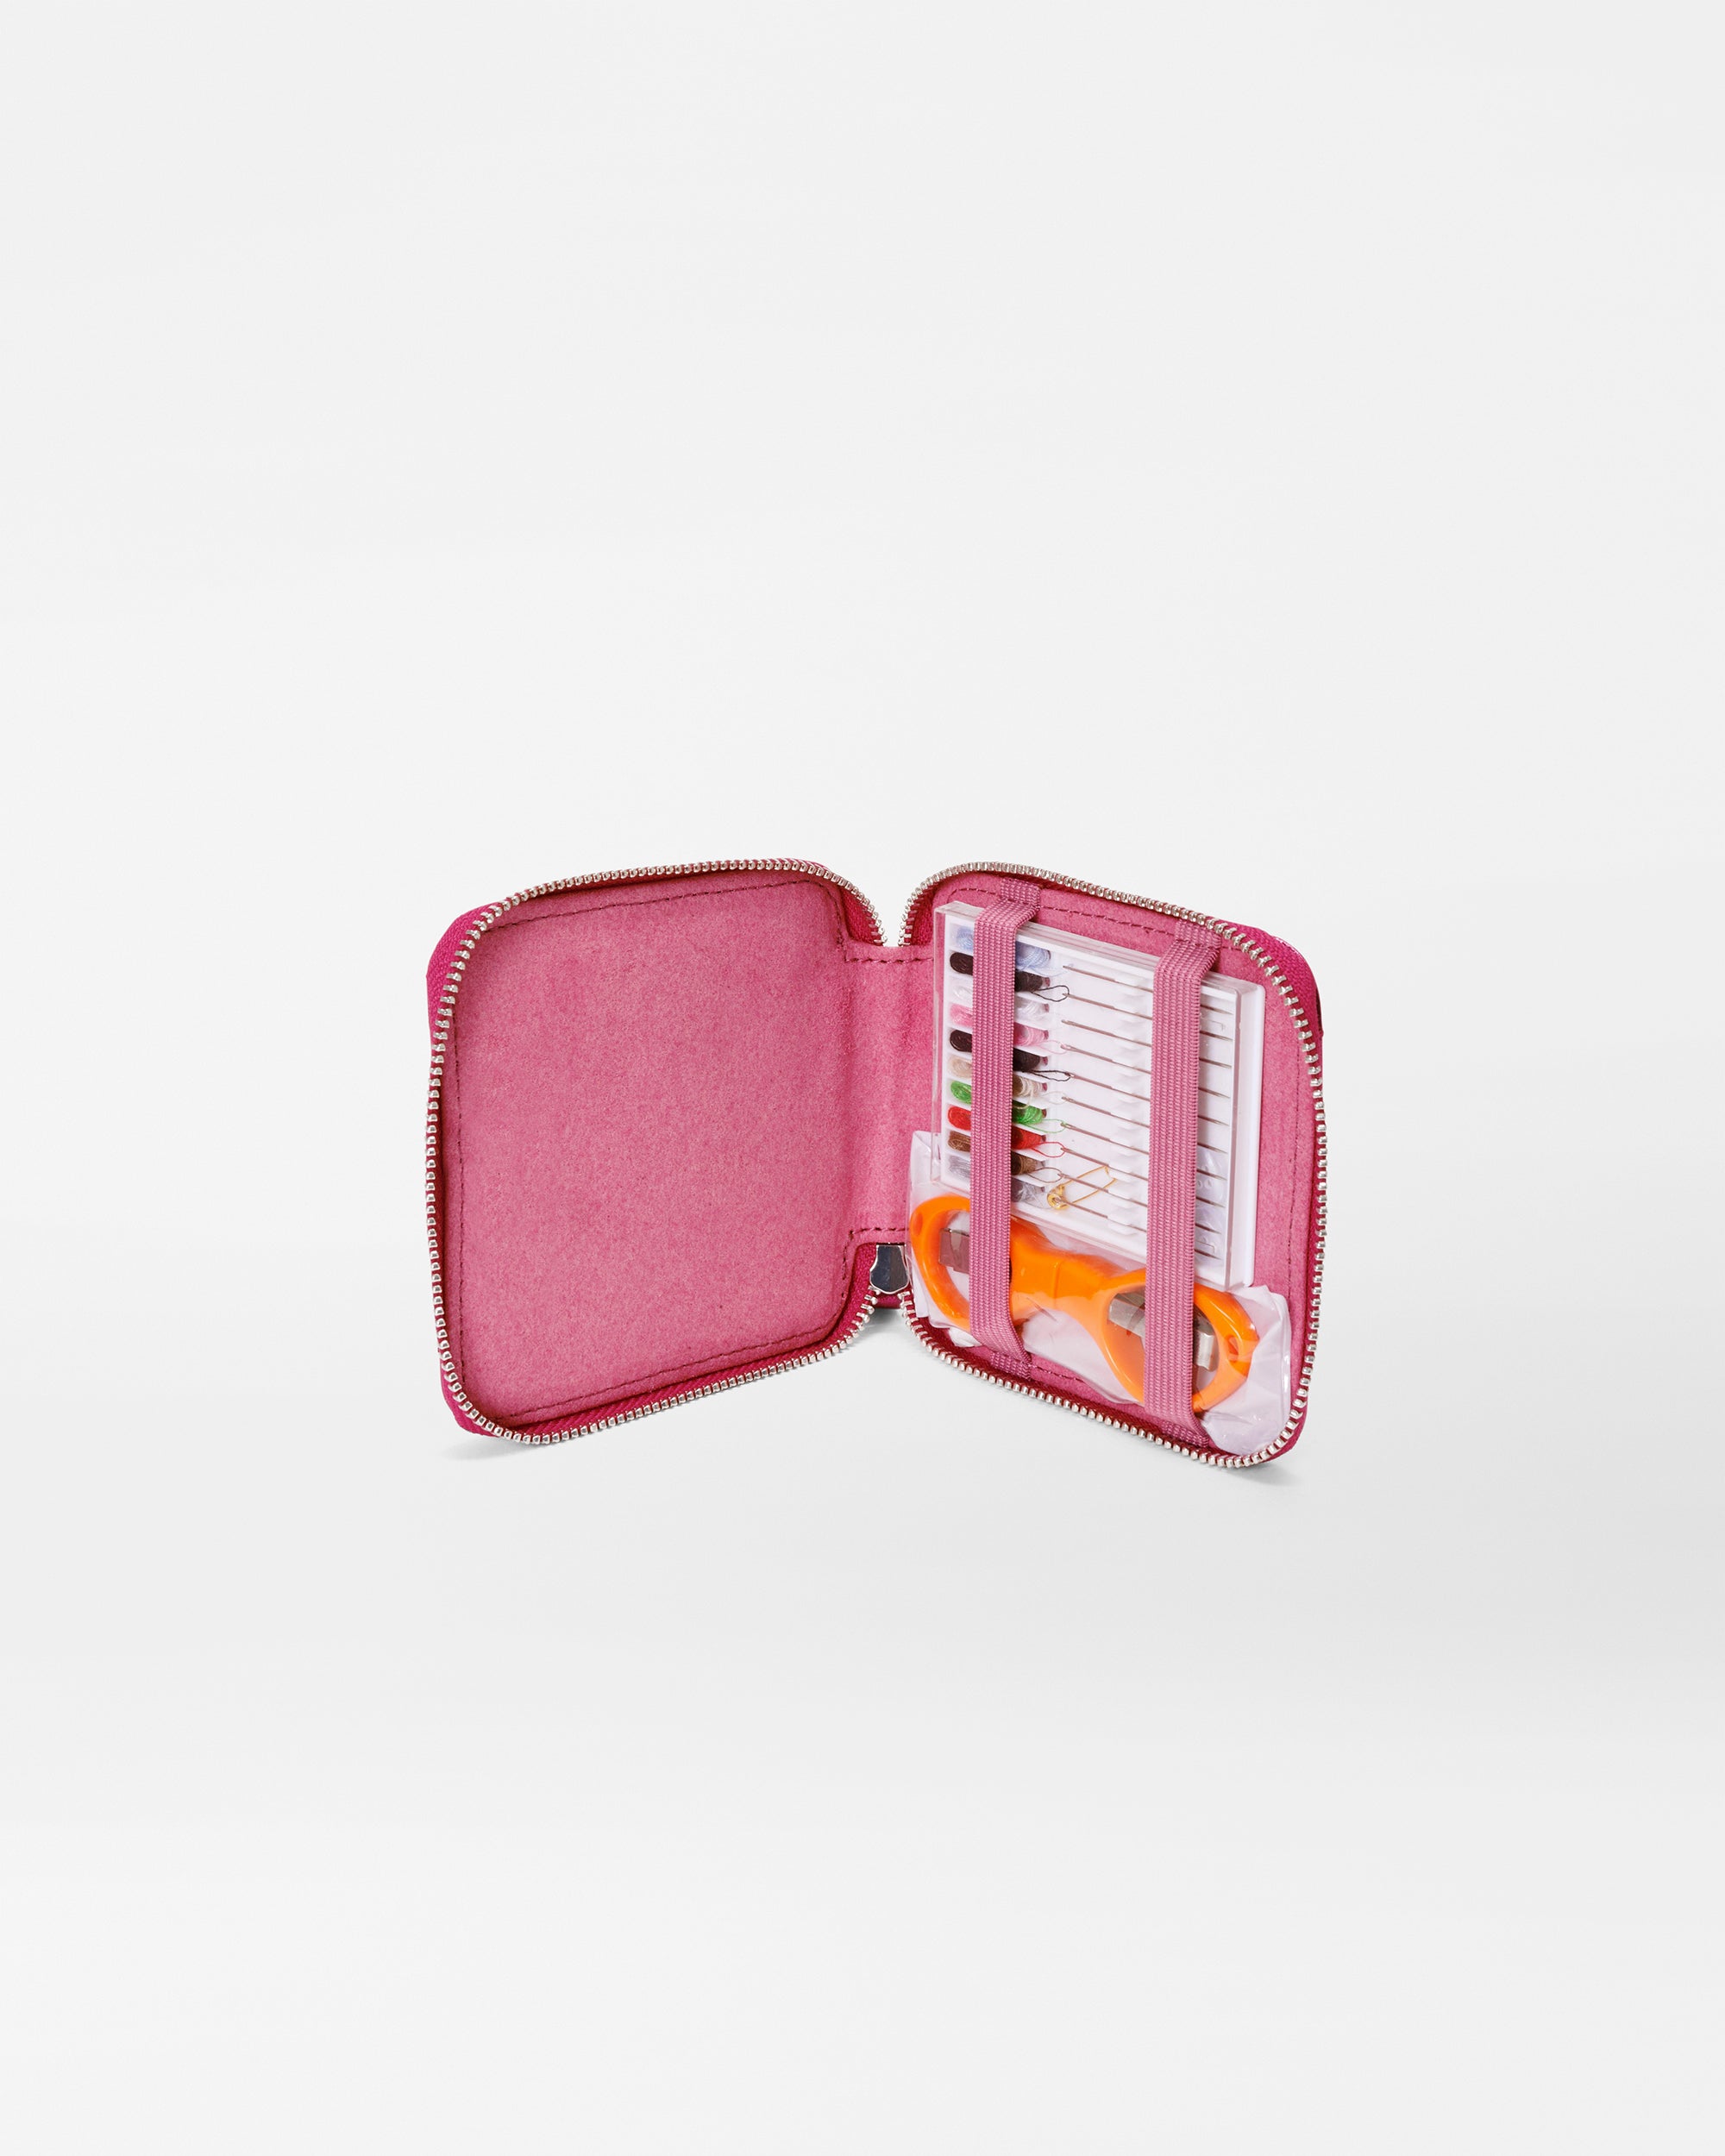 Pink Compact Travel Sewing Kit